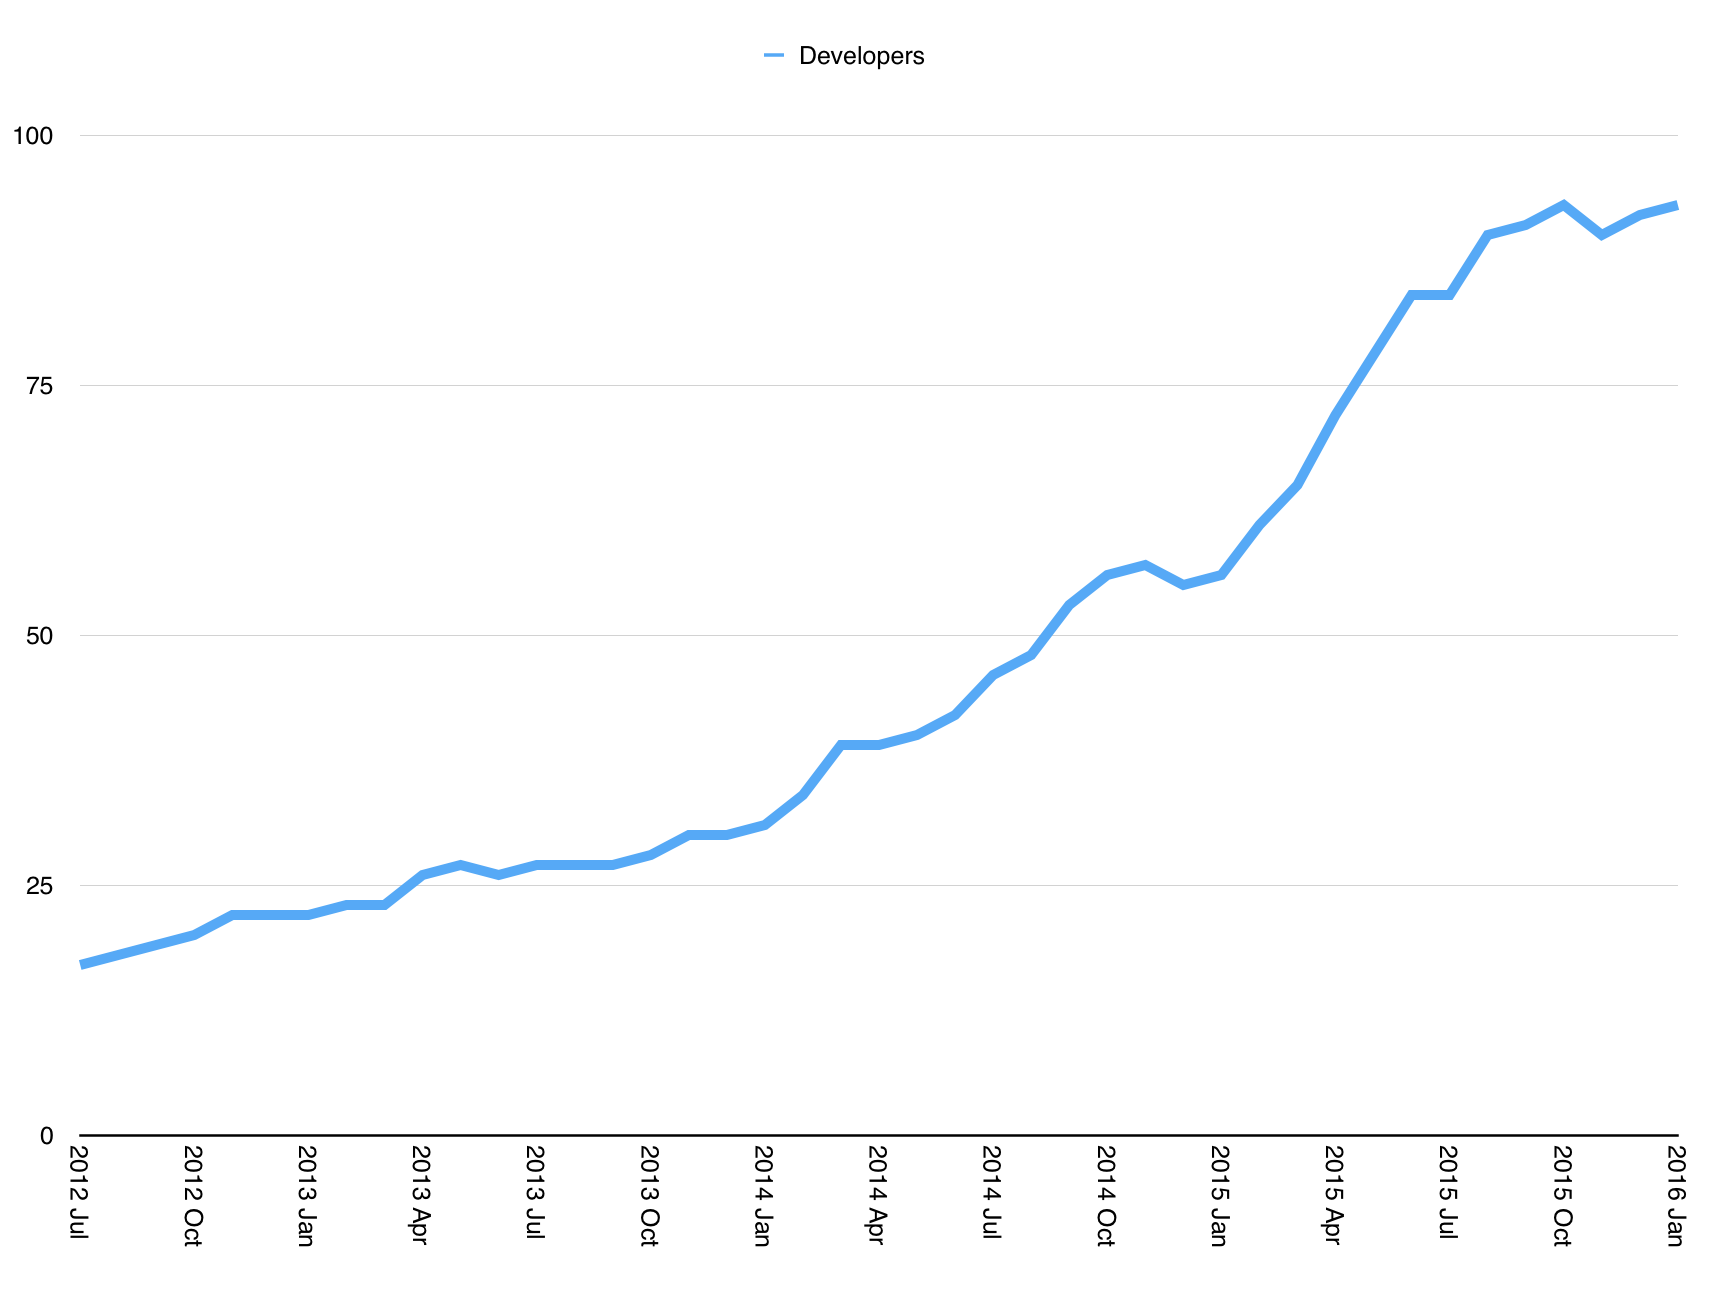 A chart of the size of the Engineering team at Tyro showing exponential growth from 2013 to 2016